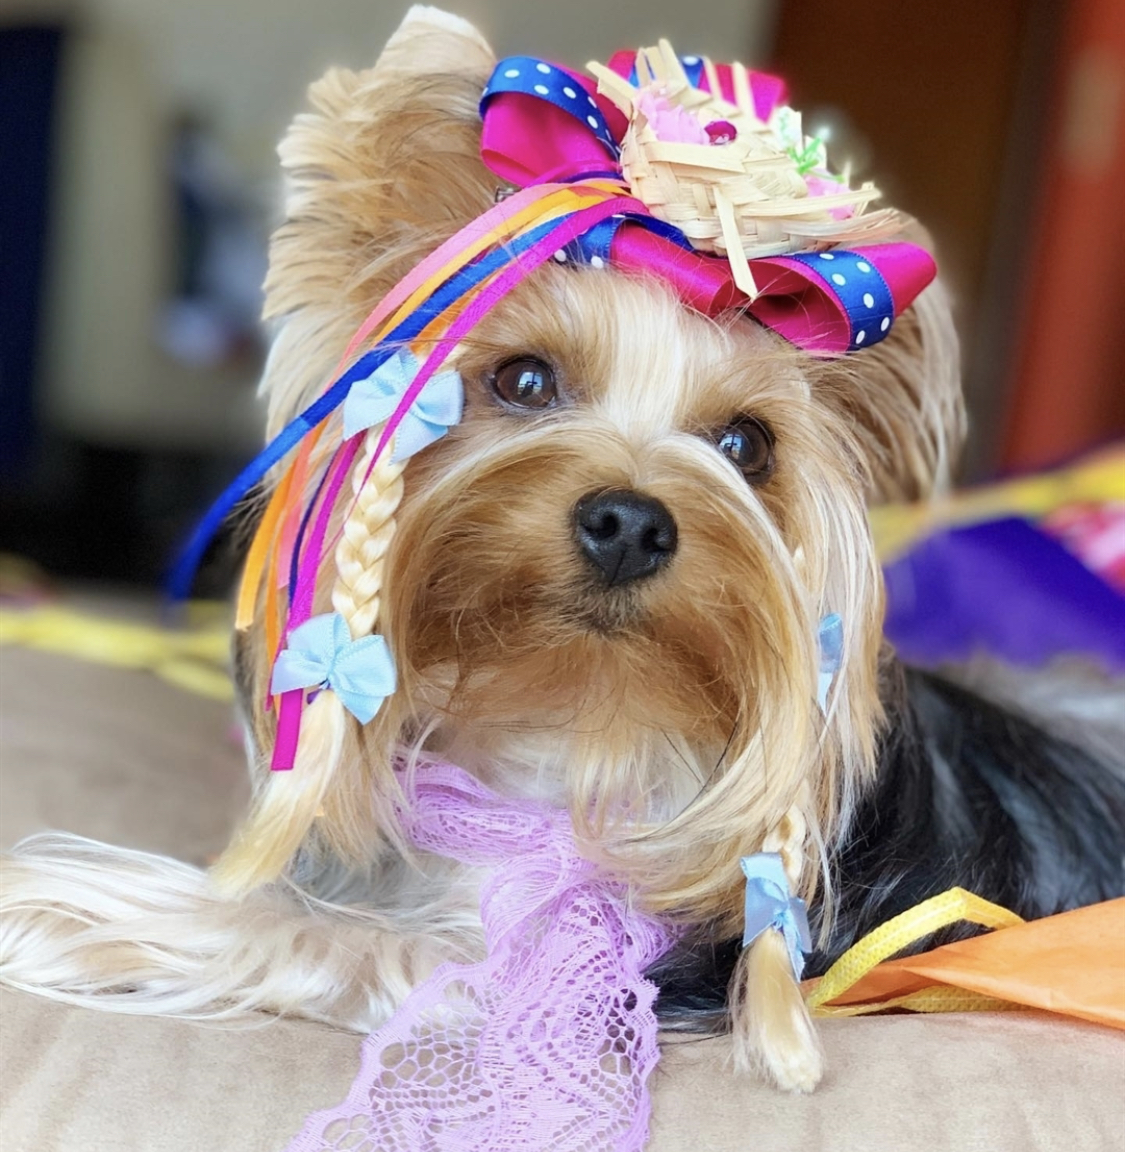 Yorkshire Terrier wearing colorful headpiece with blonde braids lying down on the bed